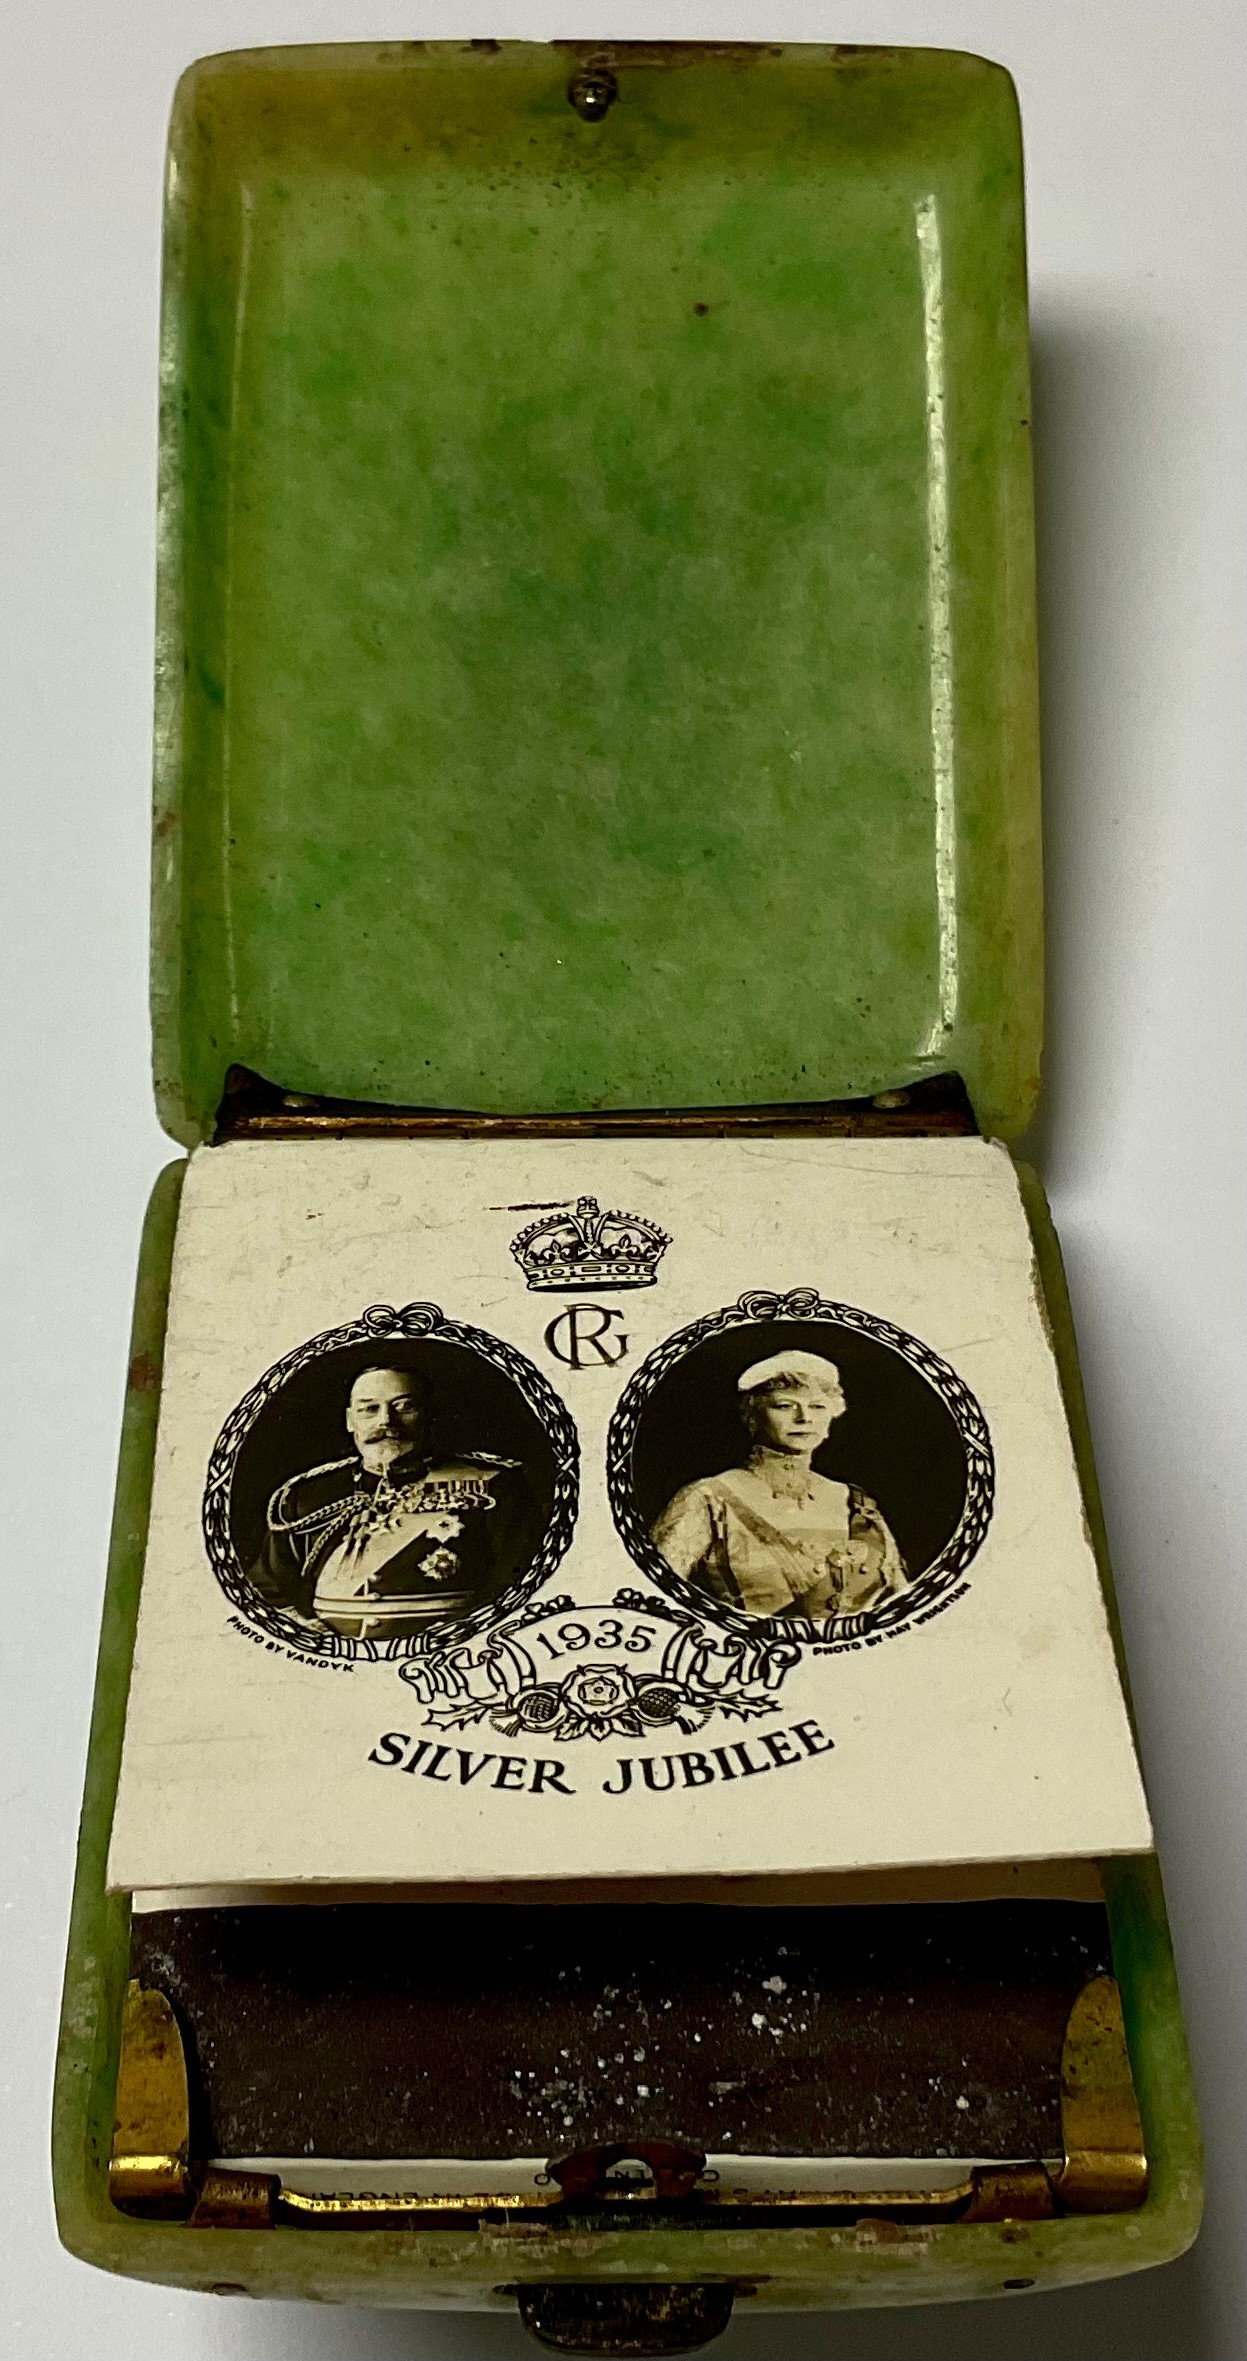 A commemorative Silver Jubilee 1935 match case, containing original matches - Image 2 of 2